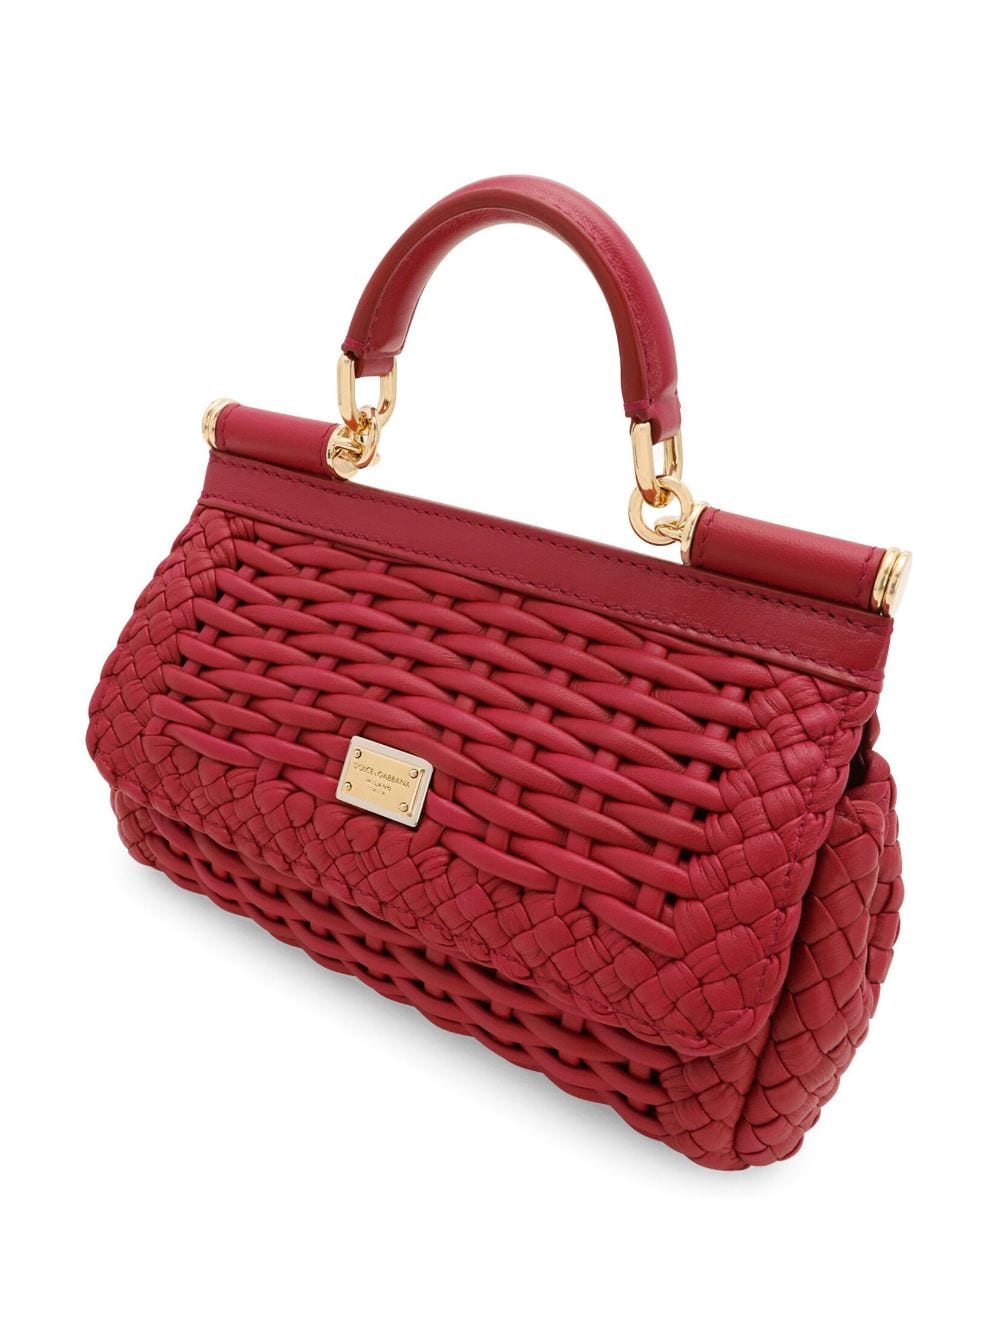 DOLCE & GABBANA Wine Red Mini Sicily Leather Shoulder Handbag with Gold-Tone Accents